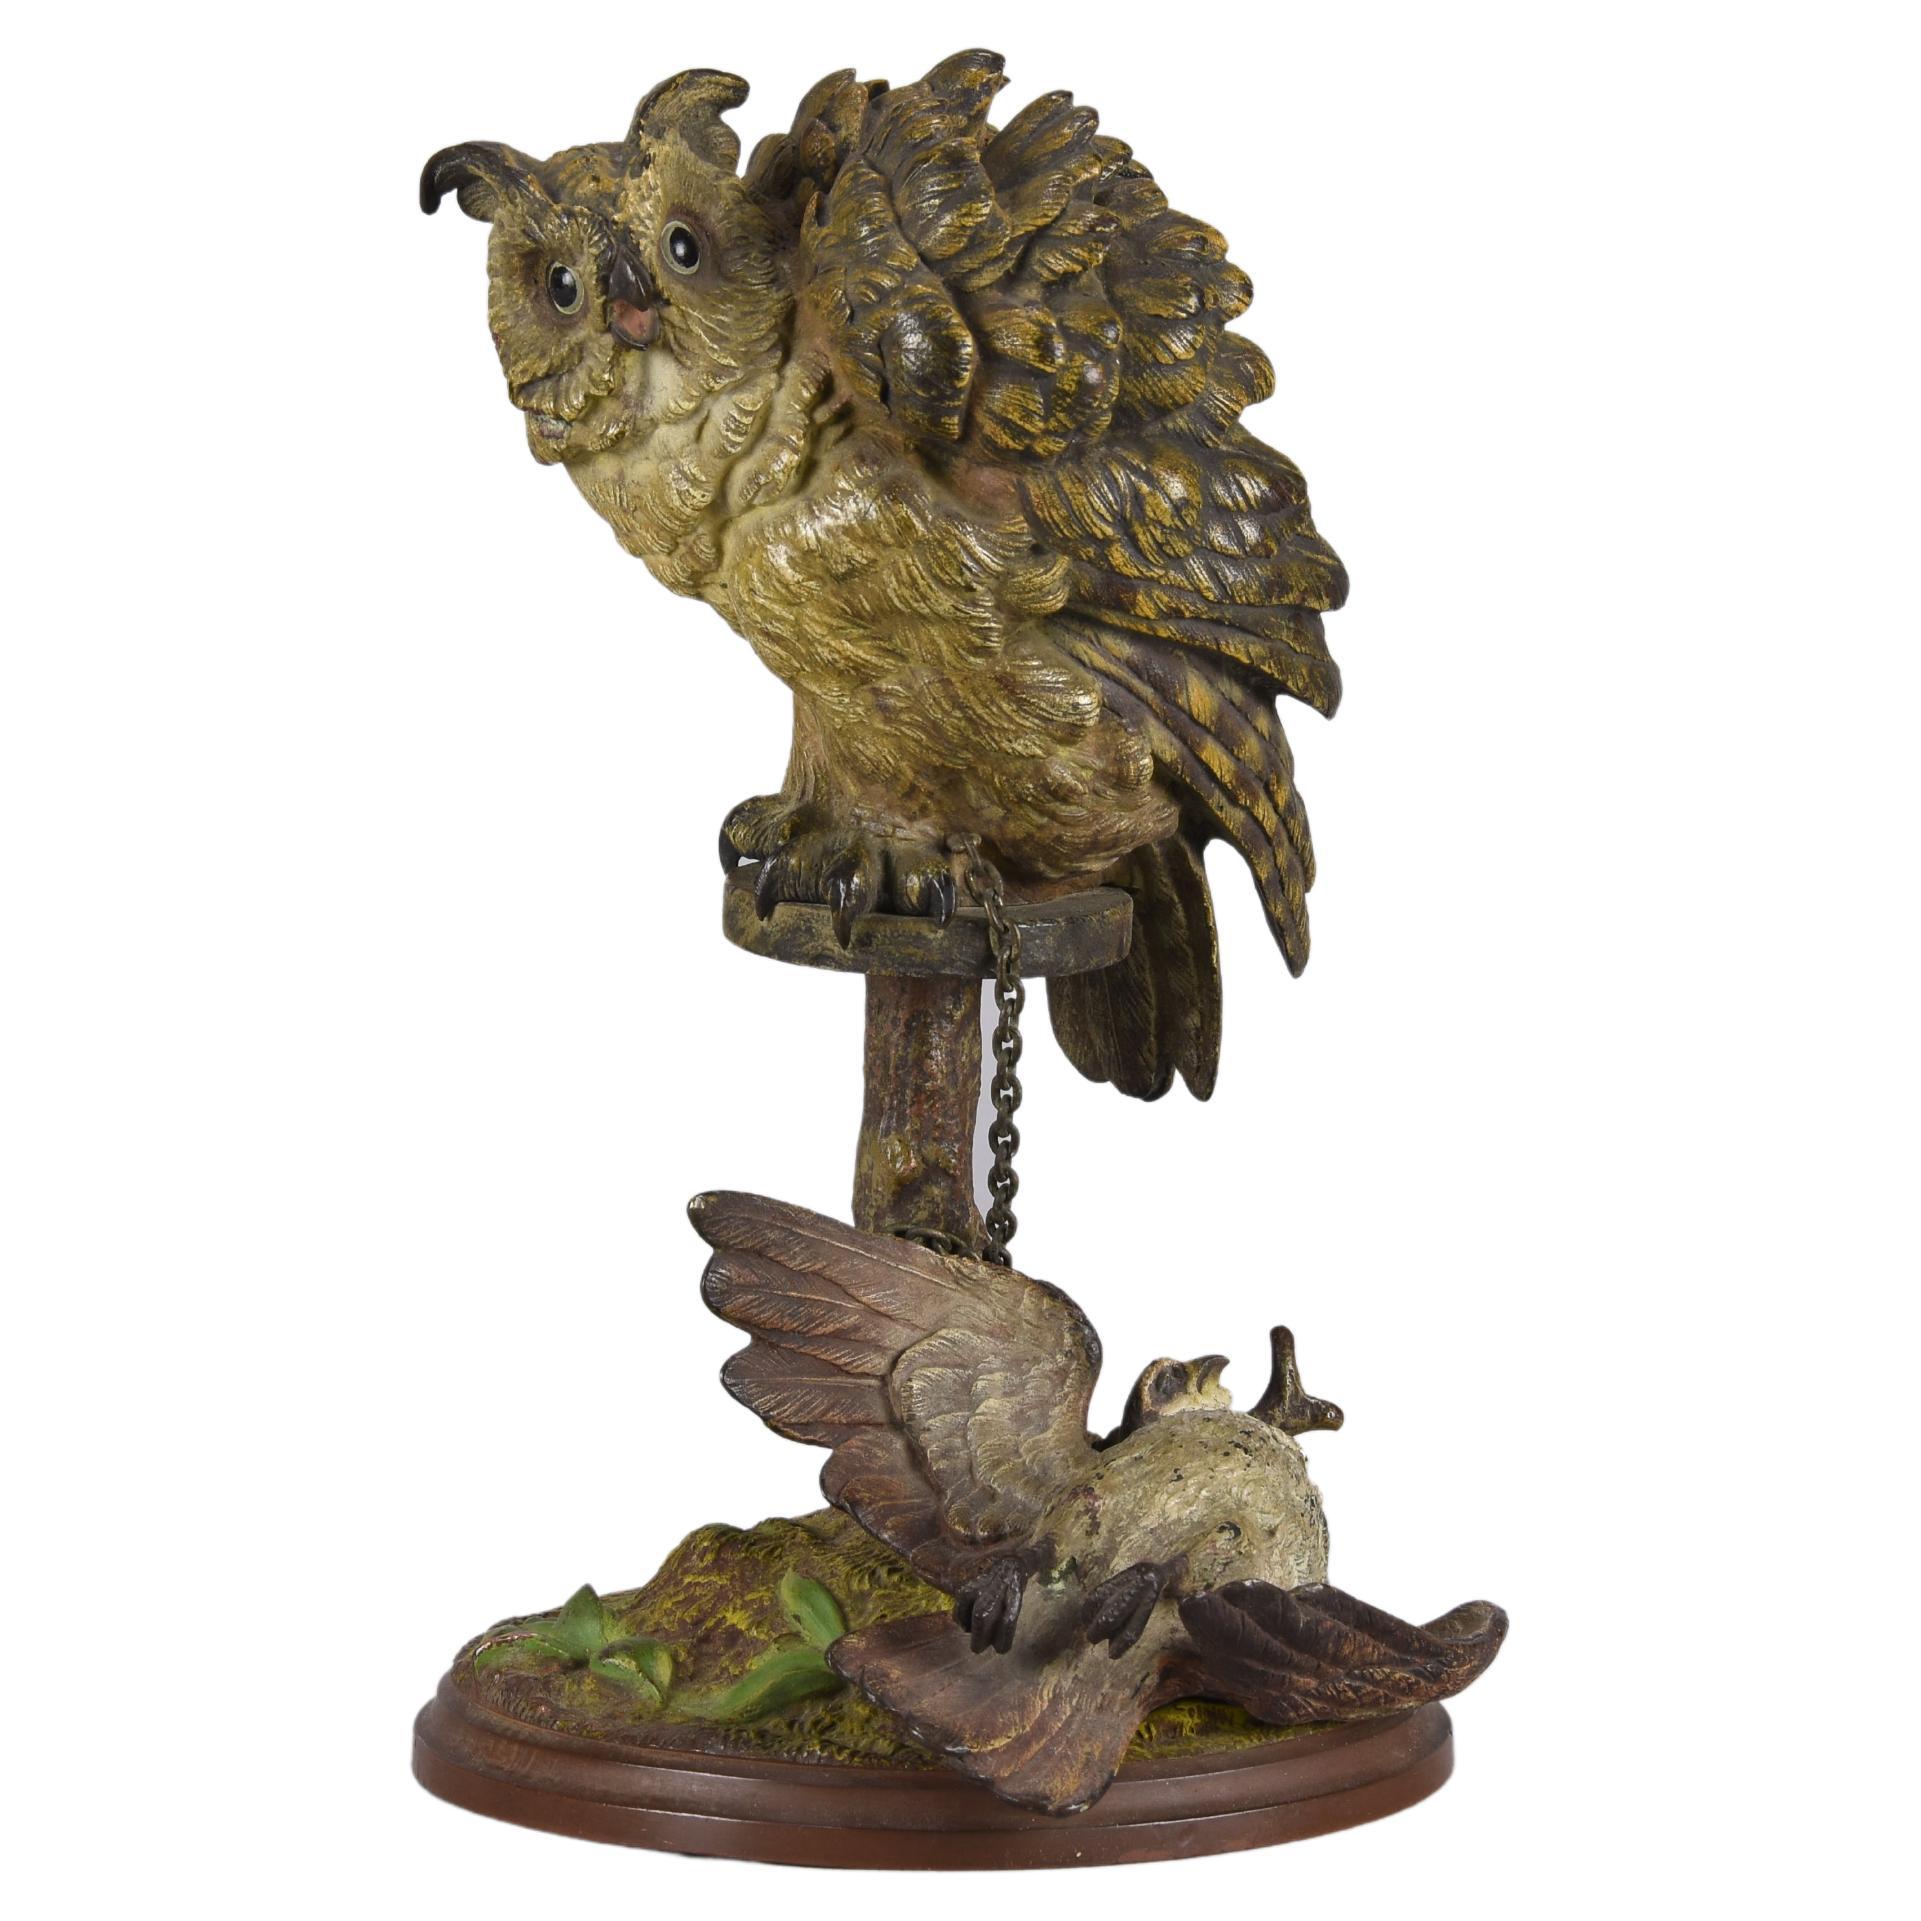 20th C Austrian Cold-Painted Bronze Entitled "Hunting Owl" by Franz Bergman For Sale